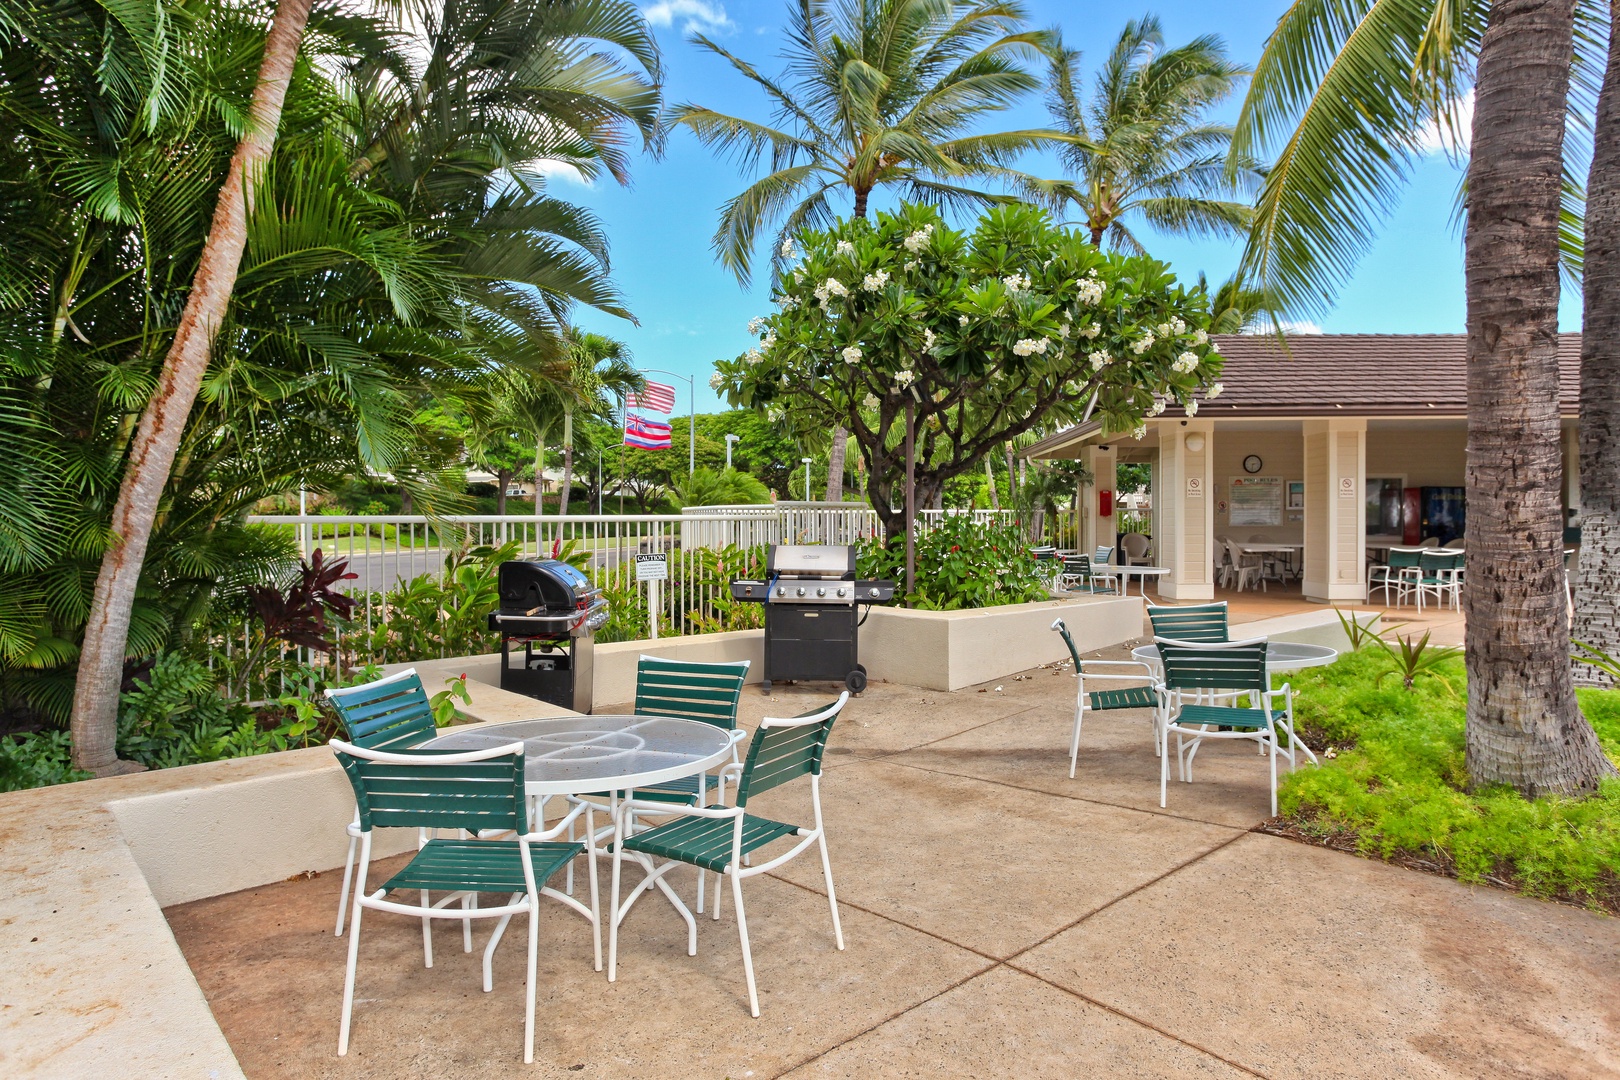 Kapolei Vacation Rentals, Fairways at Ko Olina 22H - Patio seating and BBQ grills near the pool in the Fairways at the charming Ko Olina community.